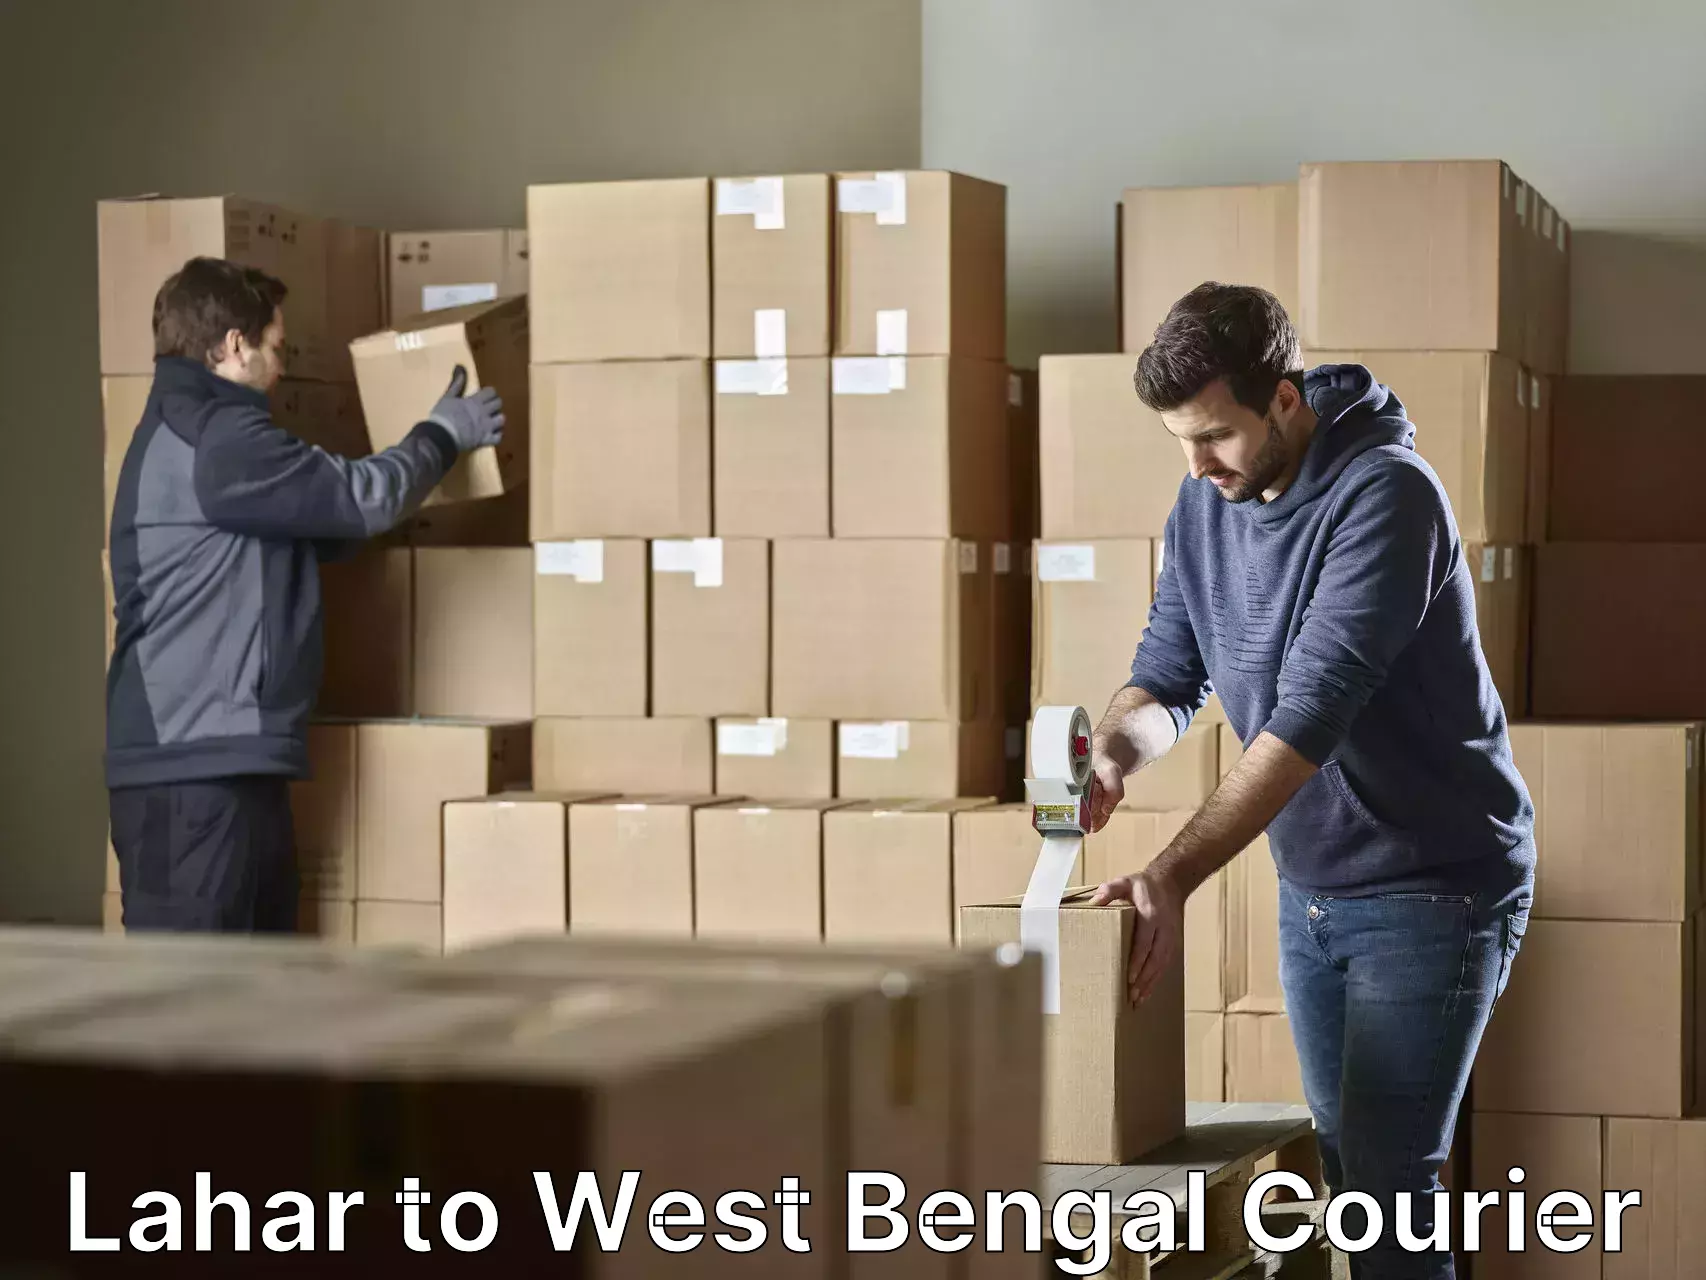 Furniture delivery service Lahar to West Bengal